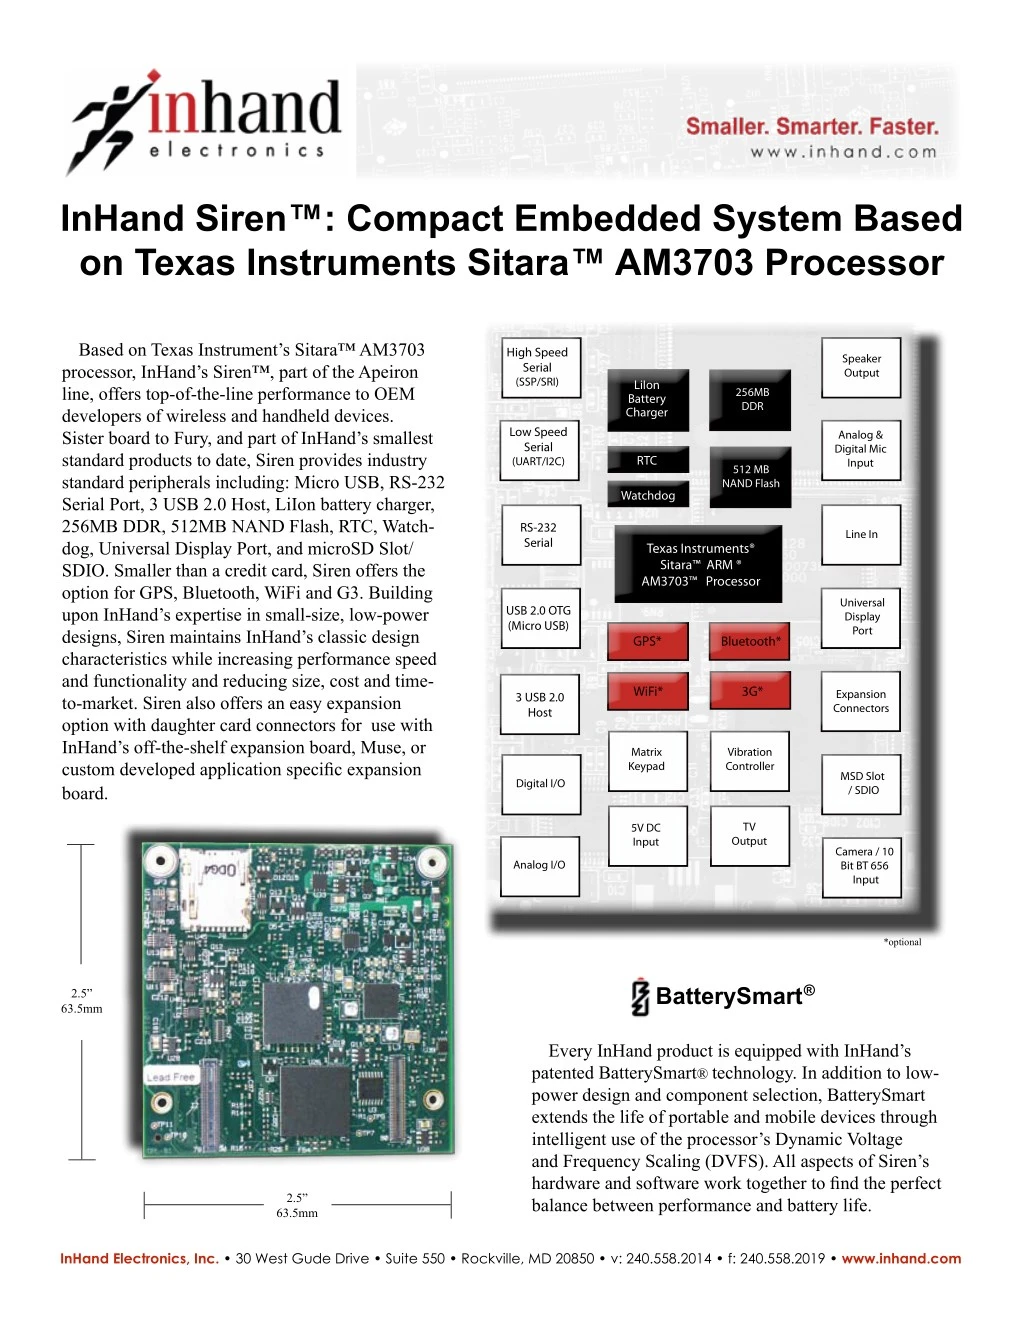 inhand siren compact embedded system based